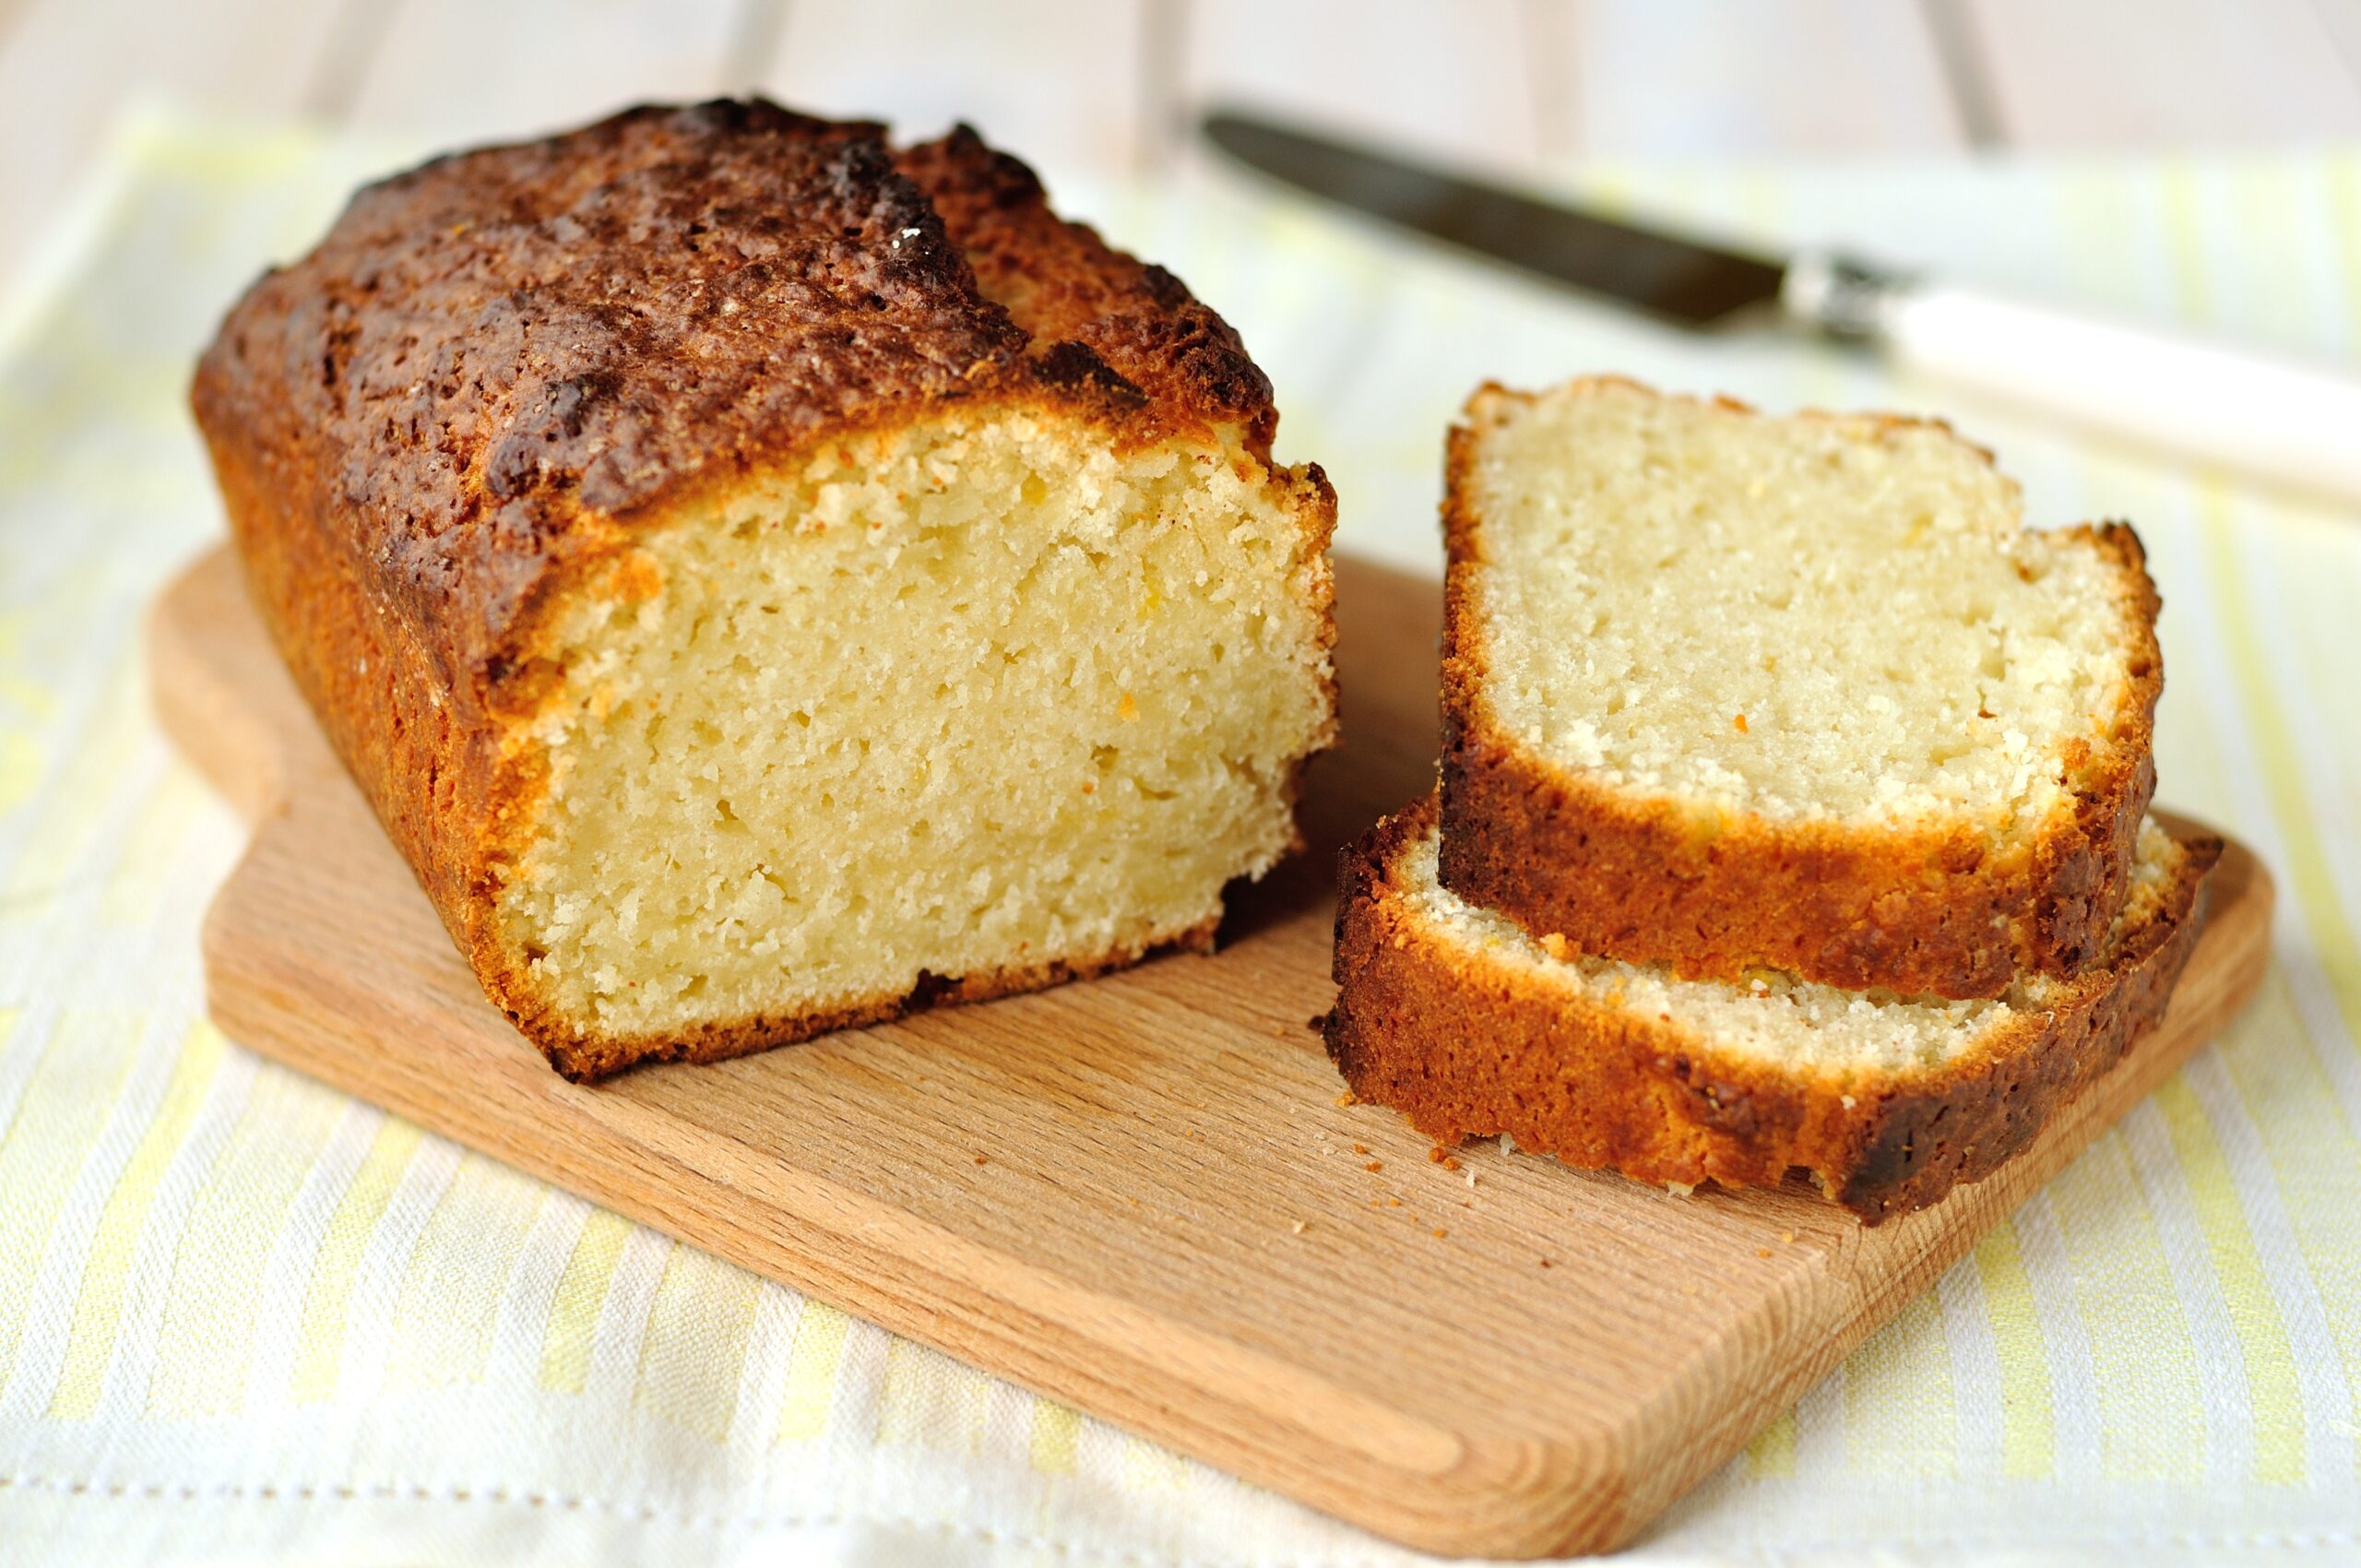 Delicious French yogurt cake is so easy kids can make it. Almost everything gets measured in the yogurt pot & there are endless variations. | www.grownupdish.com